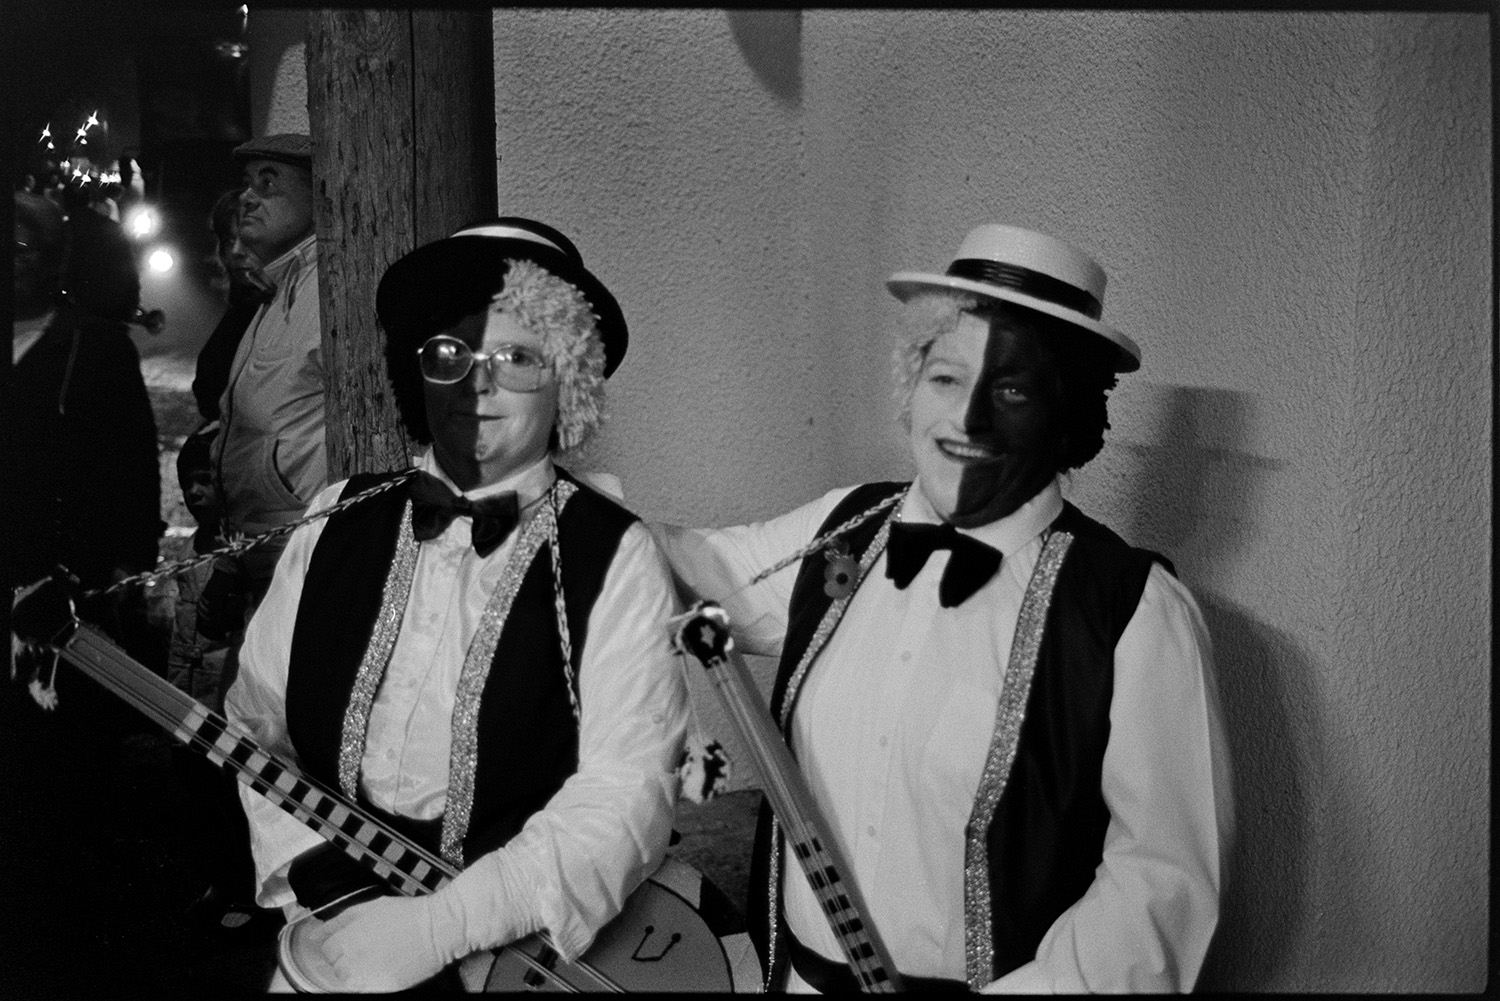 Carnival floats at night, queen and attendants, fancy dress.
[Two people dressed as black and white minstrels during the evening procession at Dolton Carnival. They are carrying banjos.]